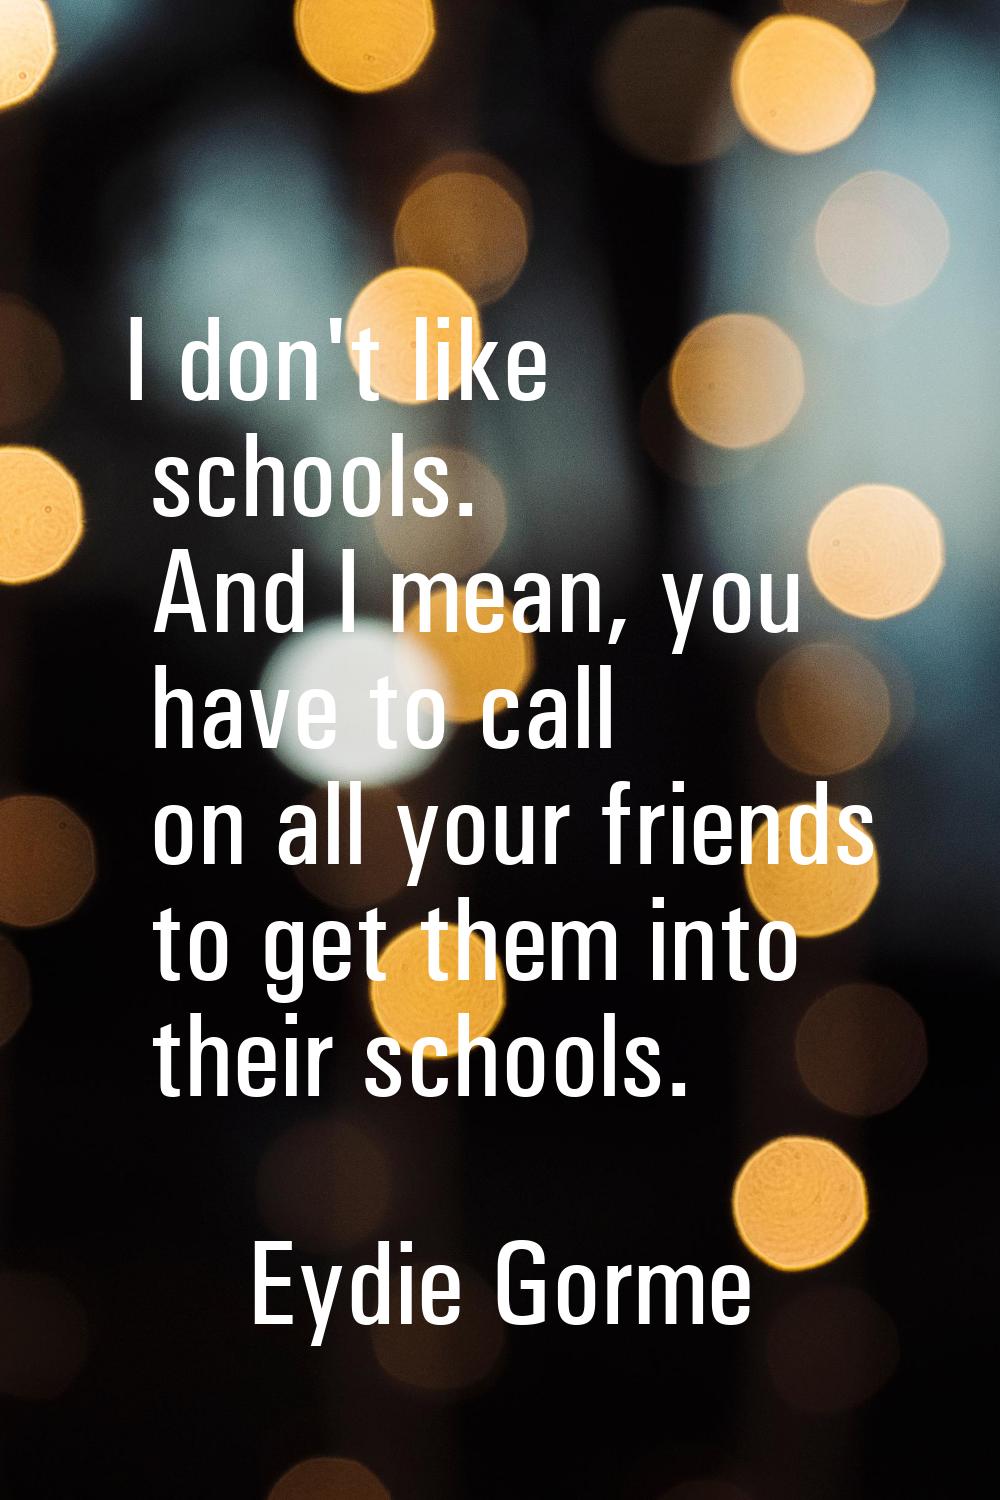 I don't like schools. And I mean, you have to call on all your friends to get them into their schoo